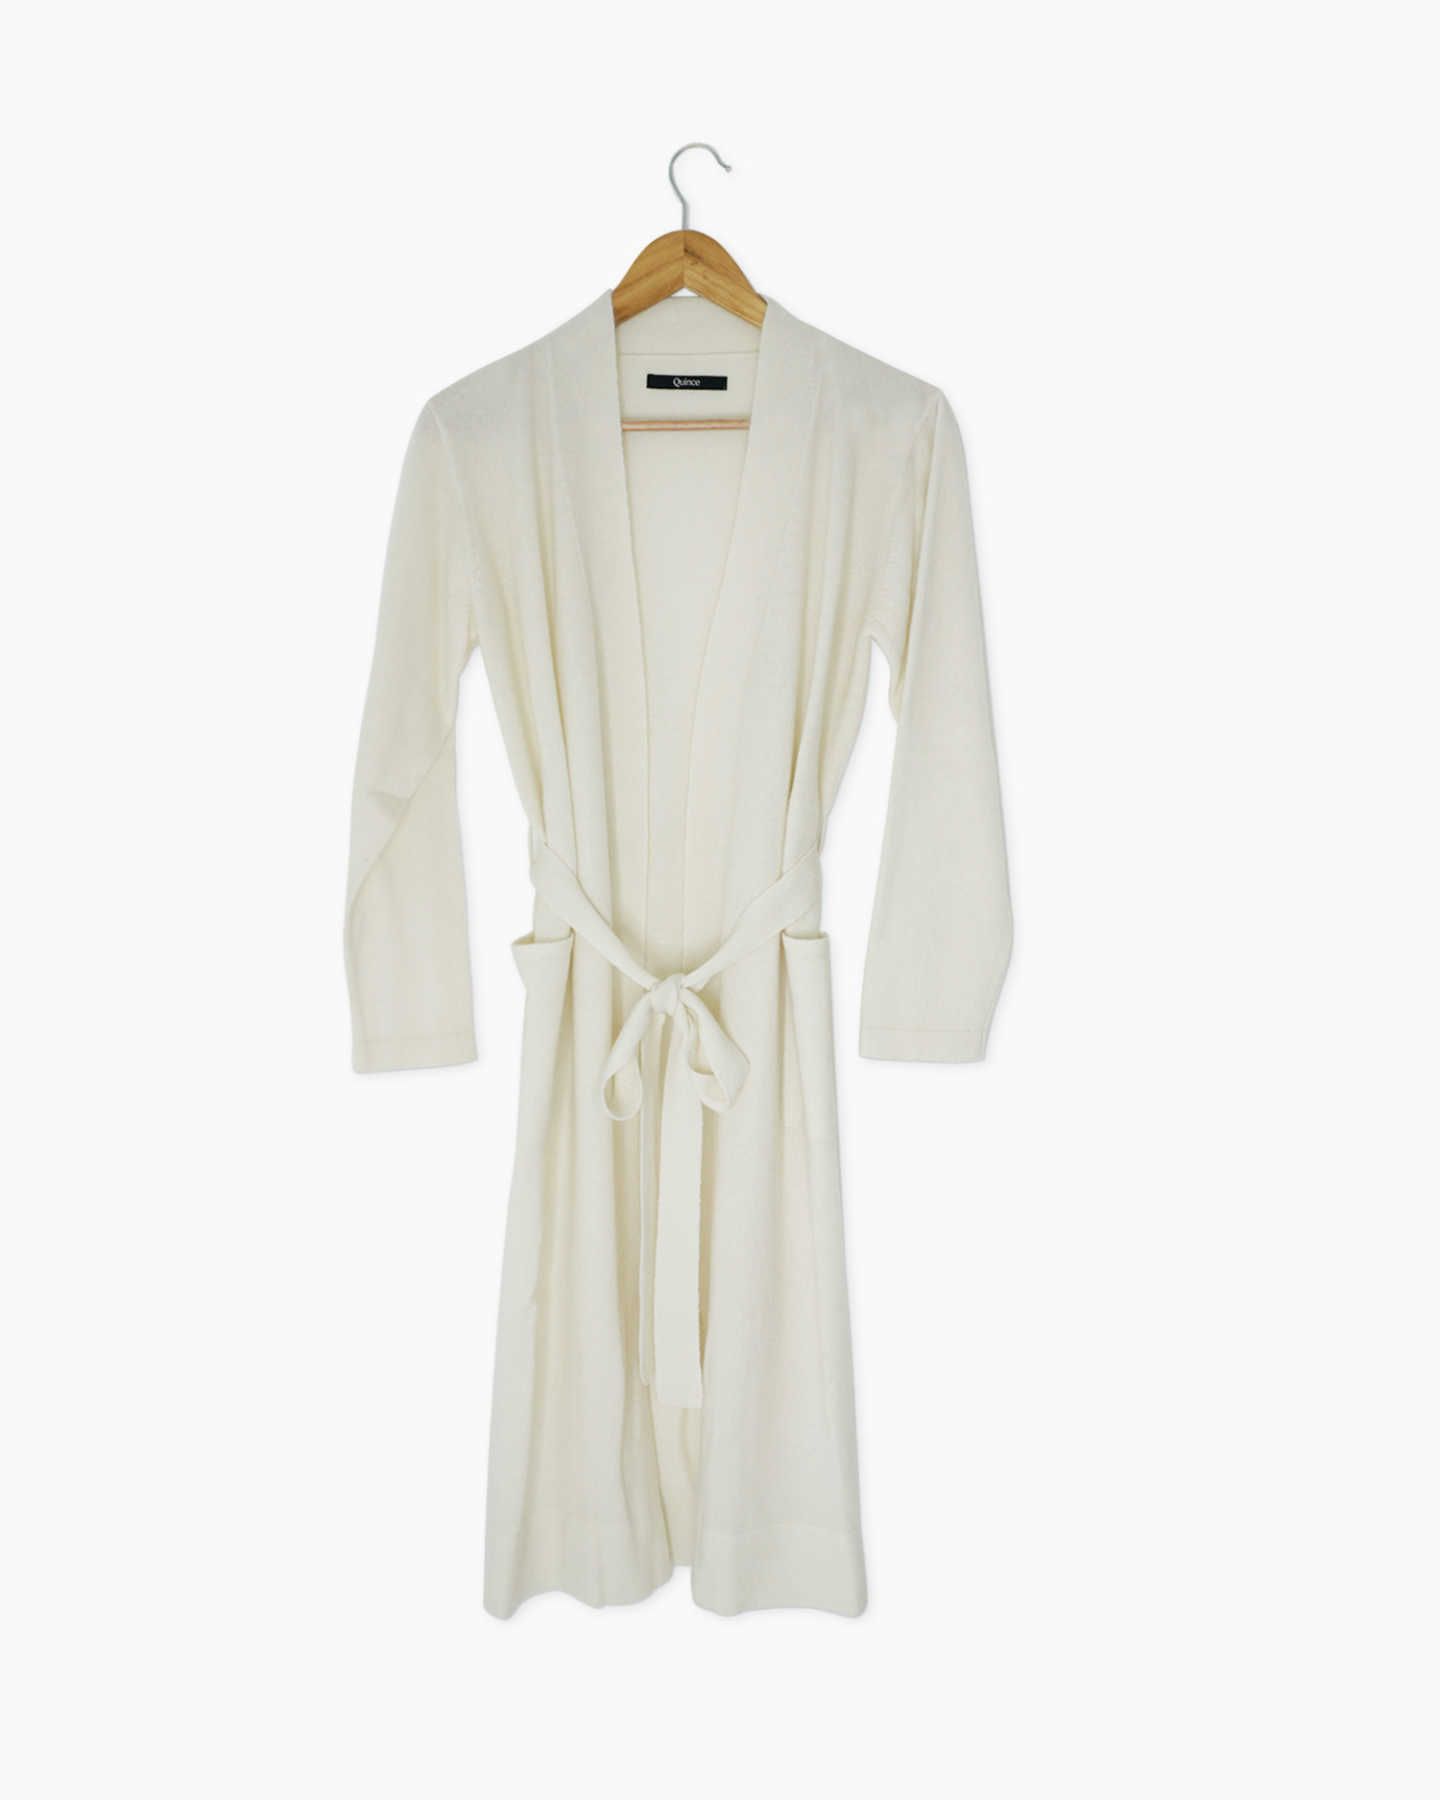 Cashmere Robe | Quince | Quince